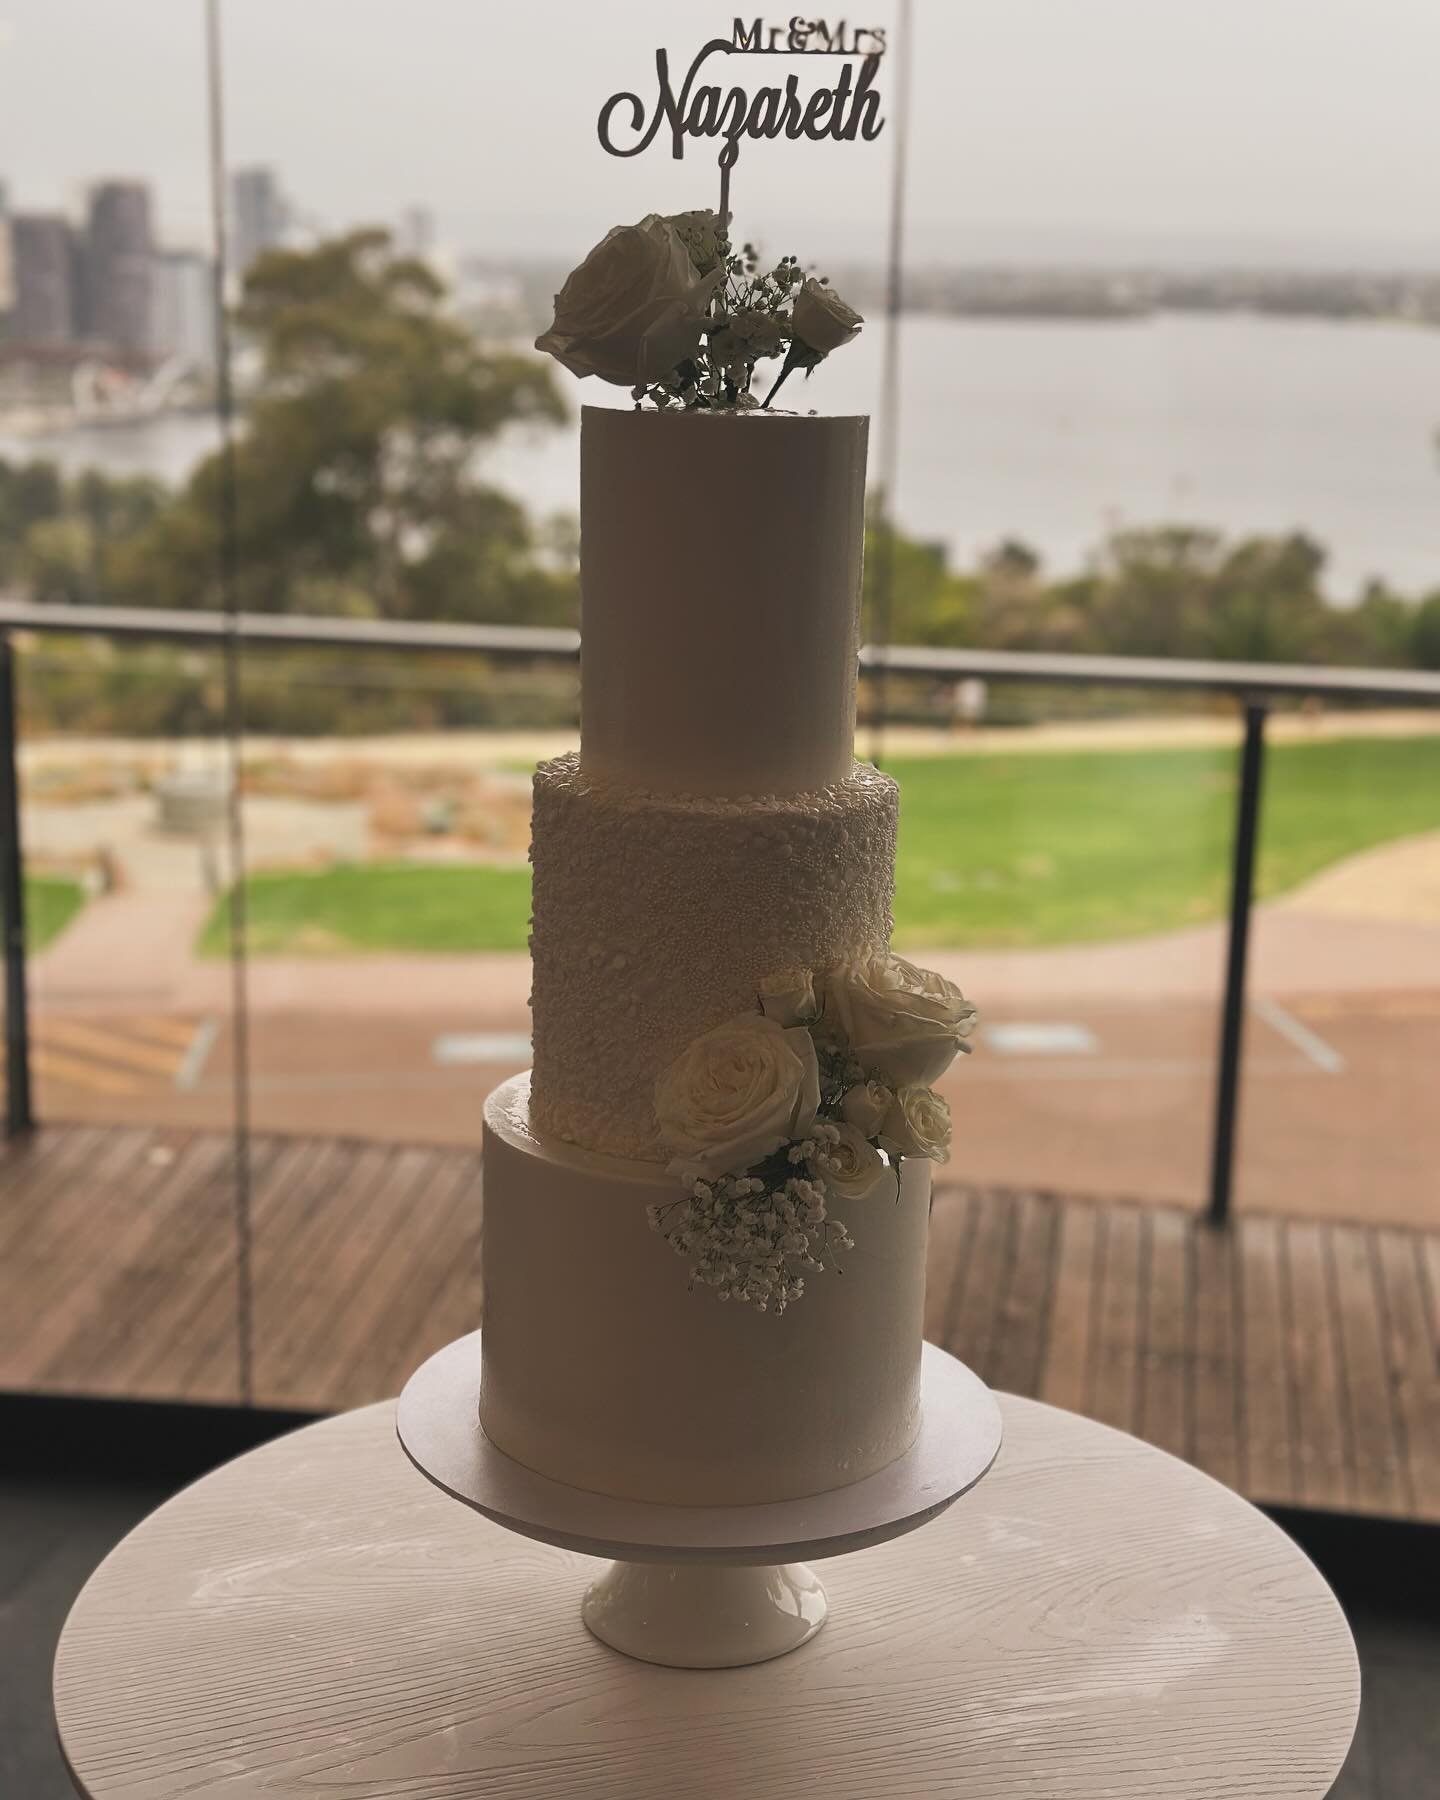 💫 Congratulations Karl &amp; Chantelle 💫 Loved creating this wedding cake for you! Thankyou for letting us share in your special celebration 💓 @frasersweddings @kansas_flowers #perthweddings #perthcakes #weddingcakes #perthcookies #perthcorporate 